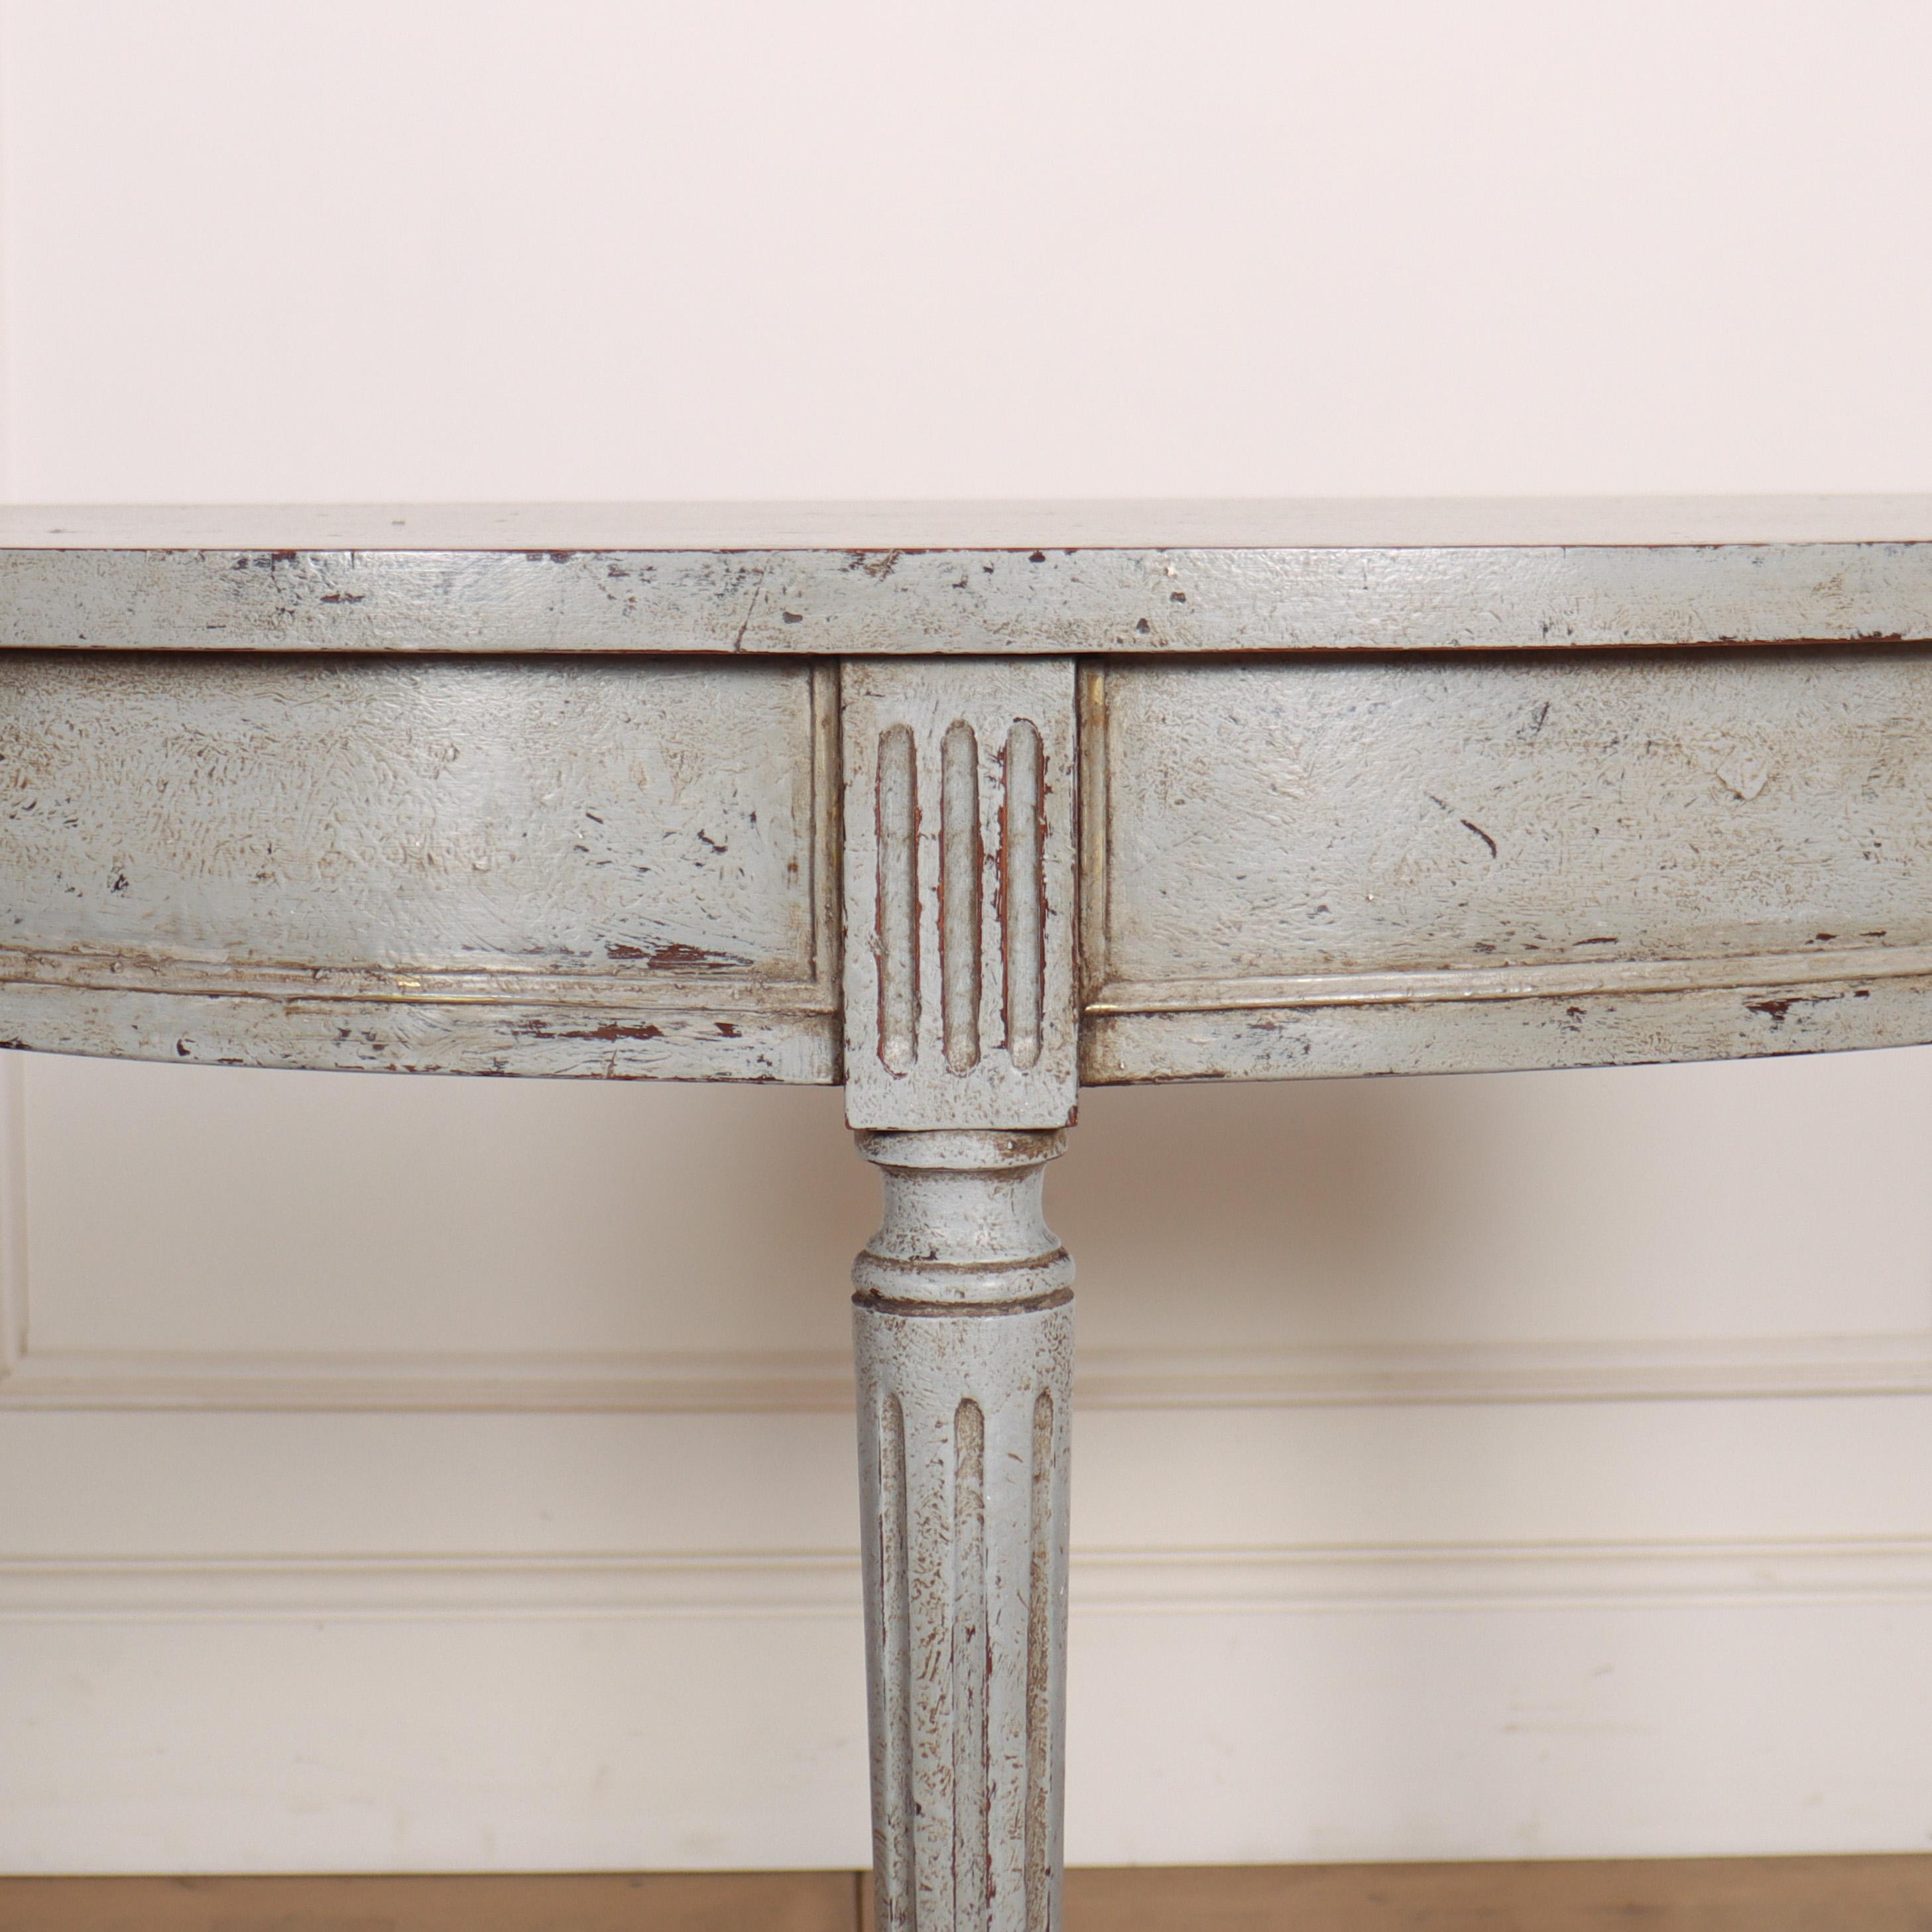 Early 20th C English painted demi-lune console table. 1920.

Reference: 7995

Dimensions
39.5 inches (100 cms) Wide
20 inches (51 cms) Deep
29.5 inches (75 cms) High